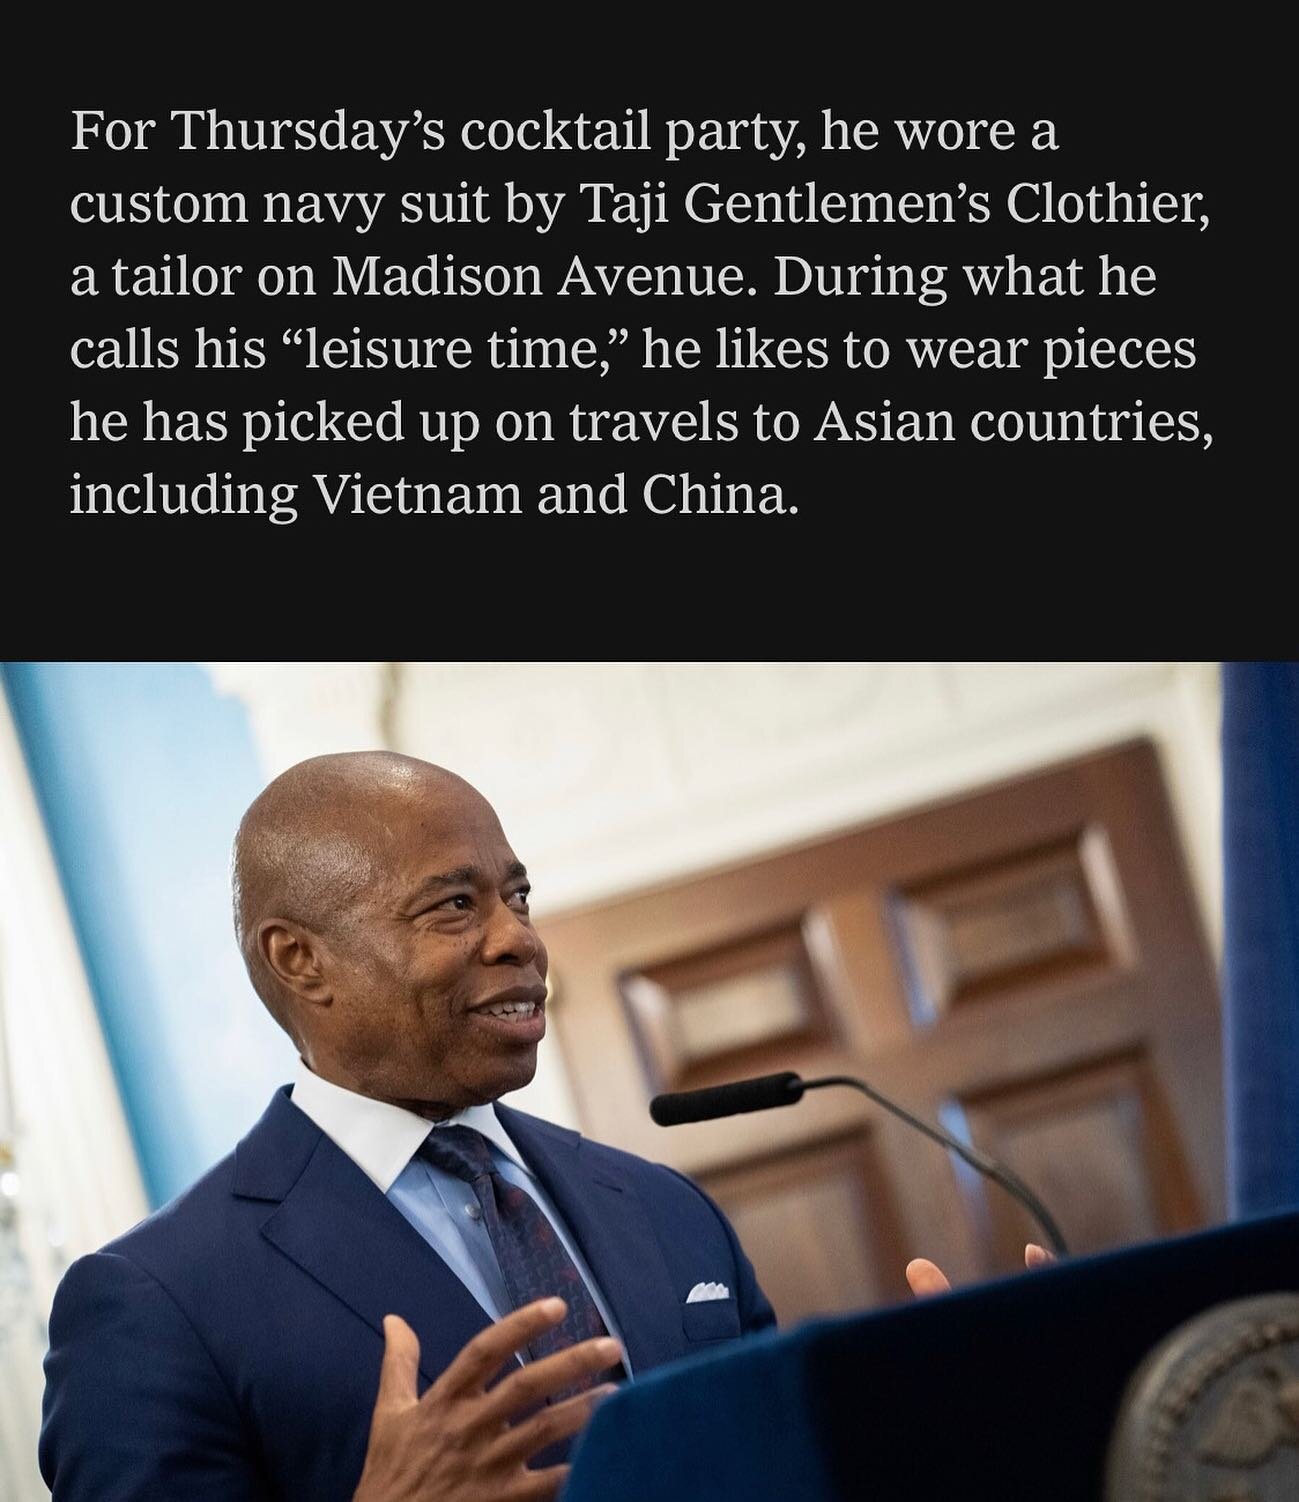 We loved today&rsquo;s article in the New York Times- Thanks for the shoutout, Mr. Mayor! 

Check out our stores to see the featured article @tajifashion @tajimadison 

#tajimadison #bespoketailoring #customsuits #nycfashion #nyccustomsuits #nycfashi